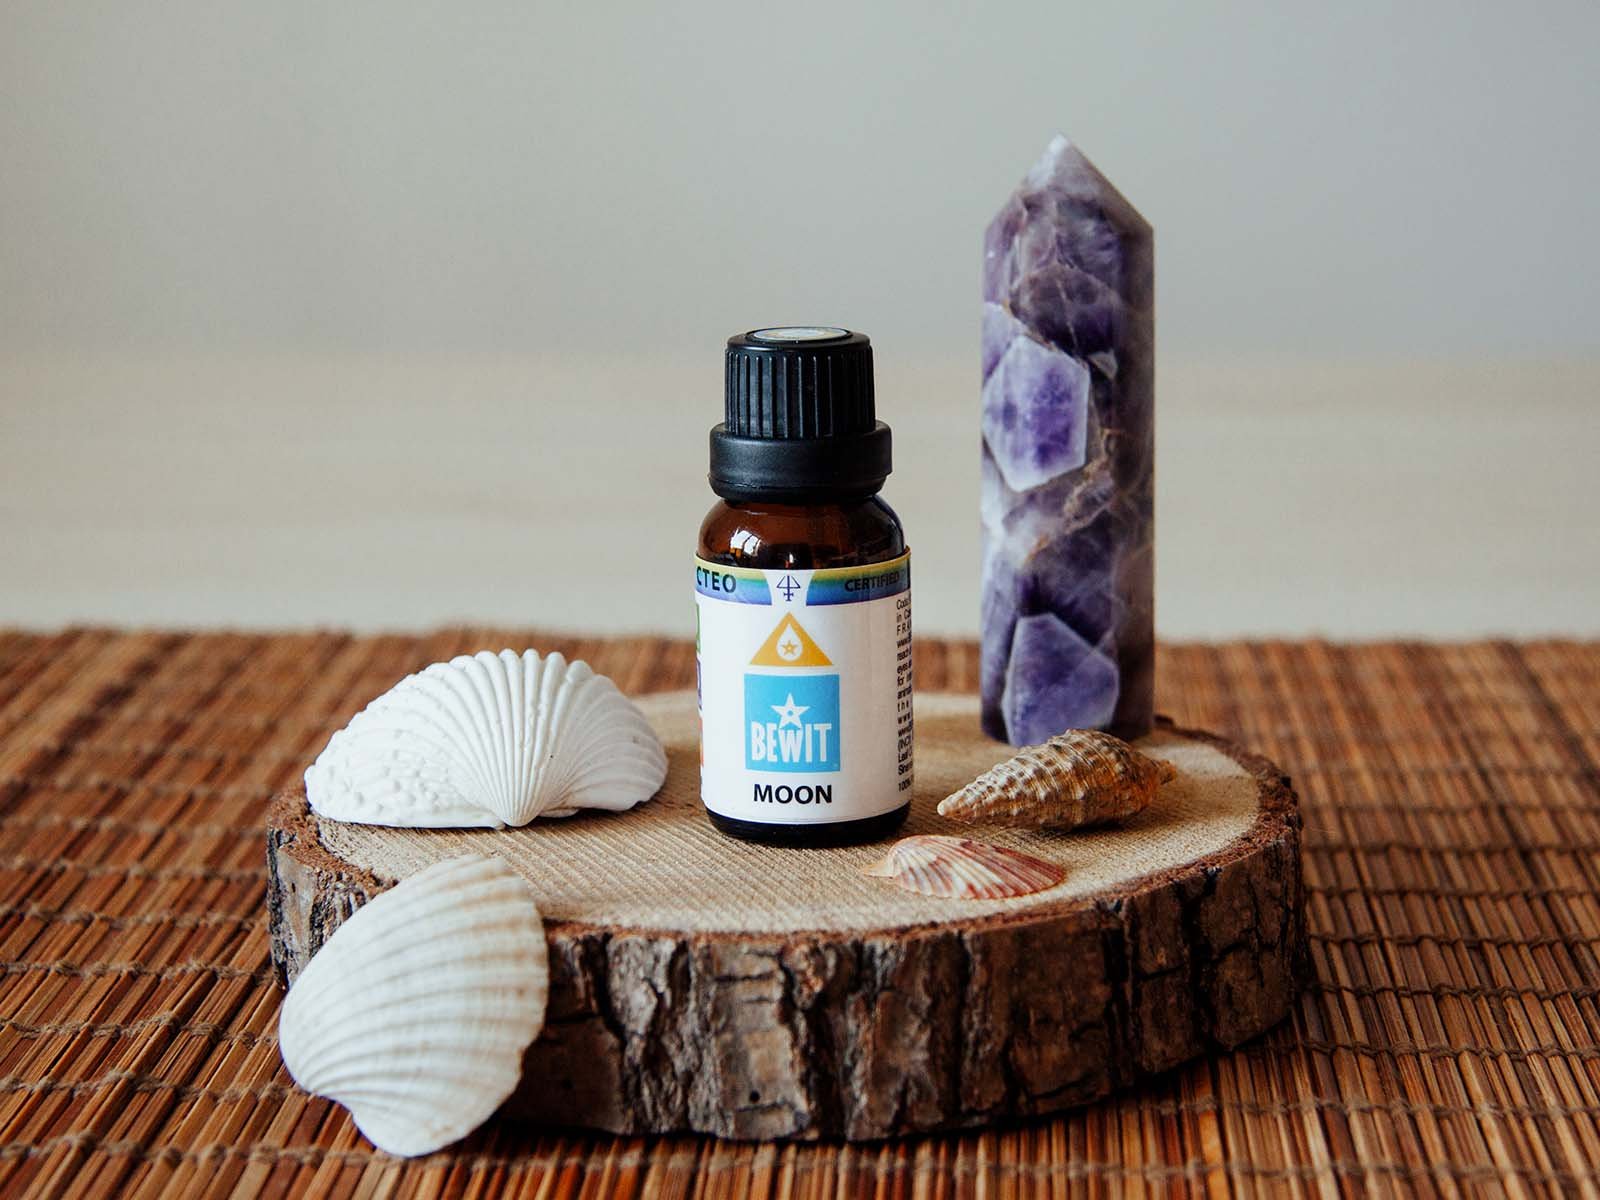 BEWIT MOON - A wonderful blend of the essential oils - 3